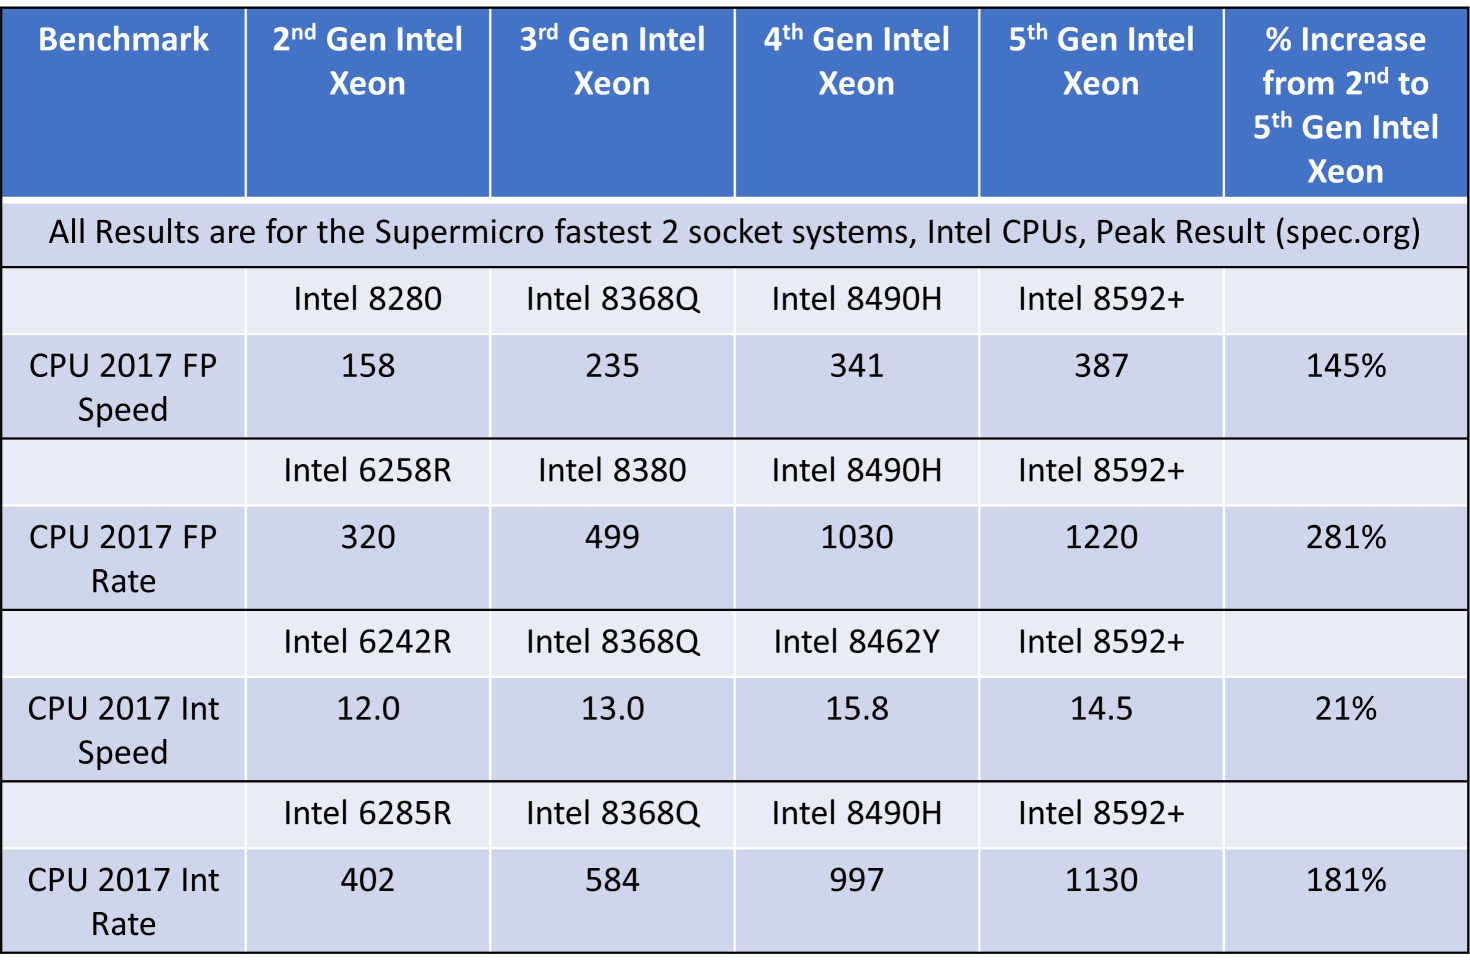 Table showing SPEC benchmarks for 2nd, 3rd, 4th, and now 5th gen Intel Xeon processors; as well as the % increase from 2nd to 5th gen.